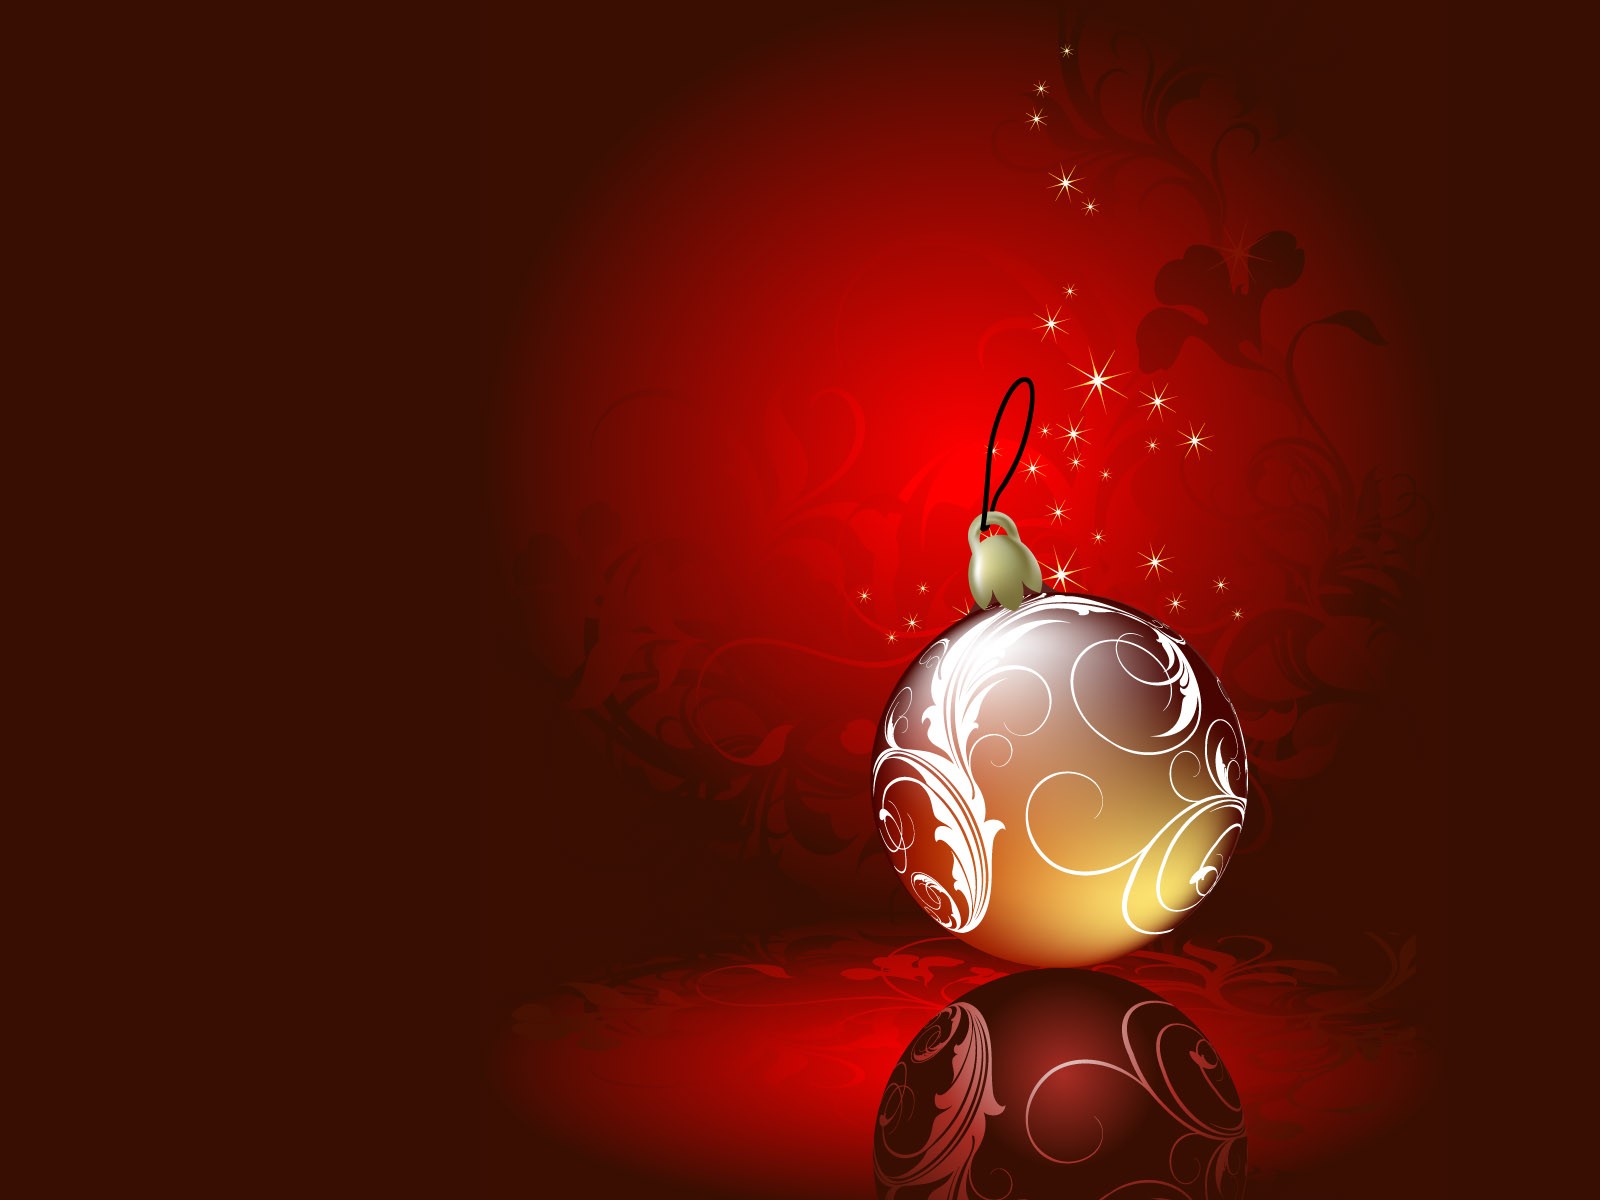 Exquisite Christmas Theme HD Wallpapers #28 - 1600x1200